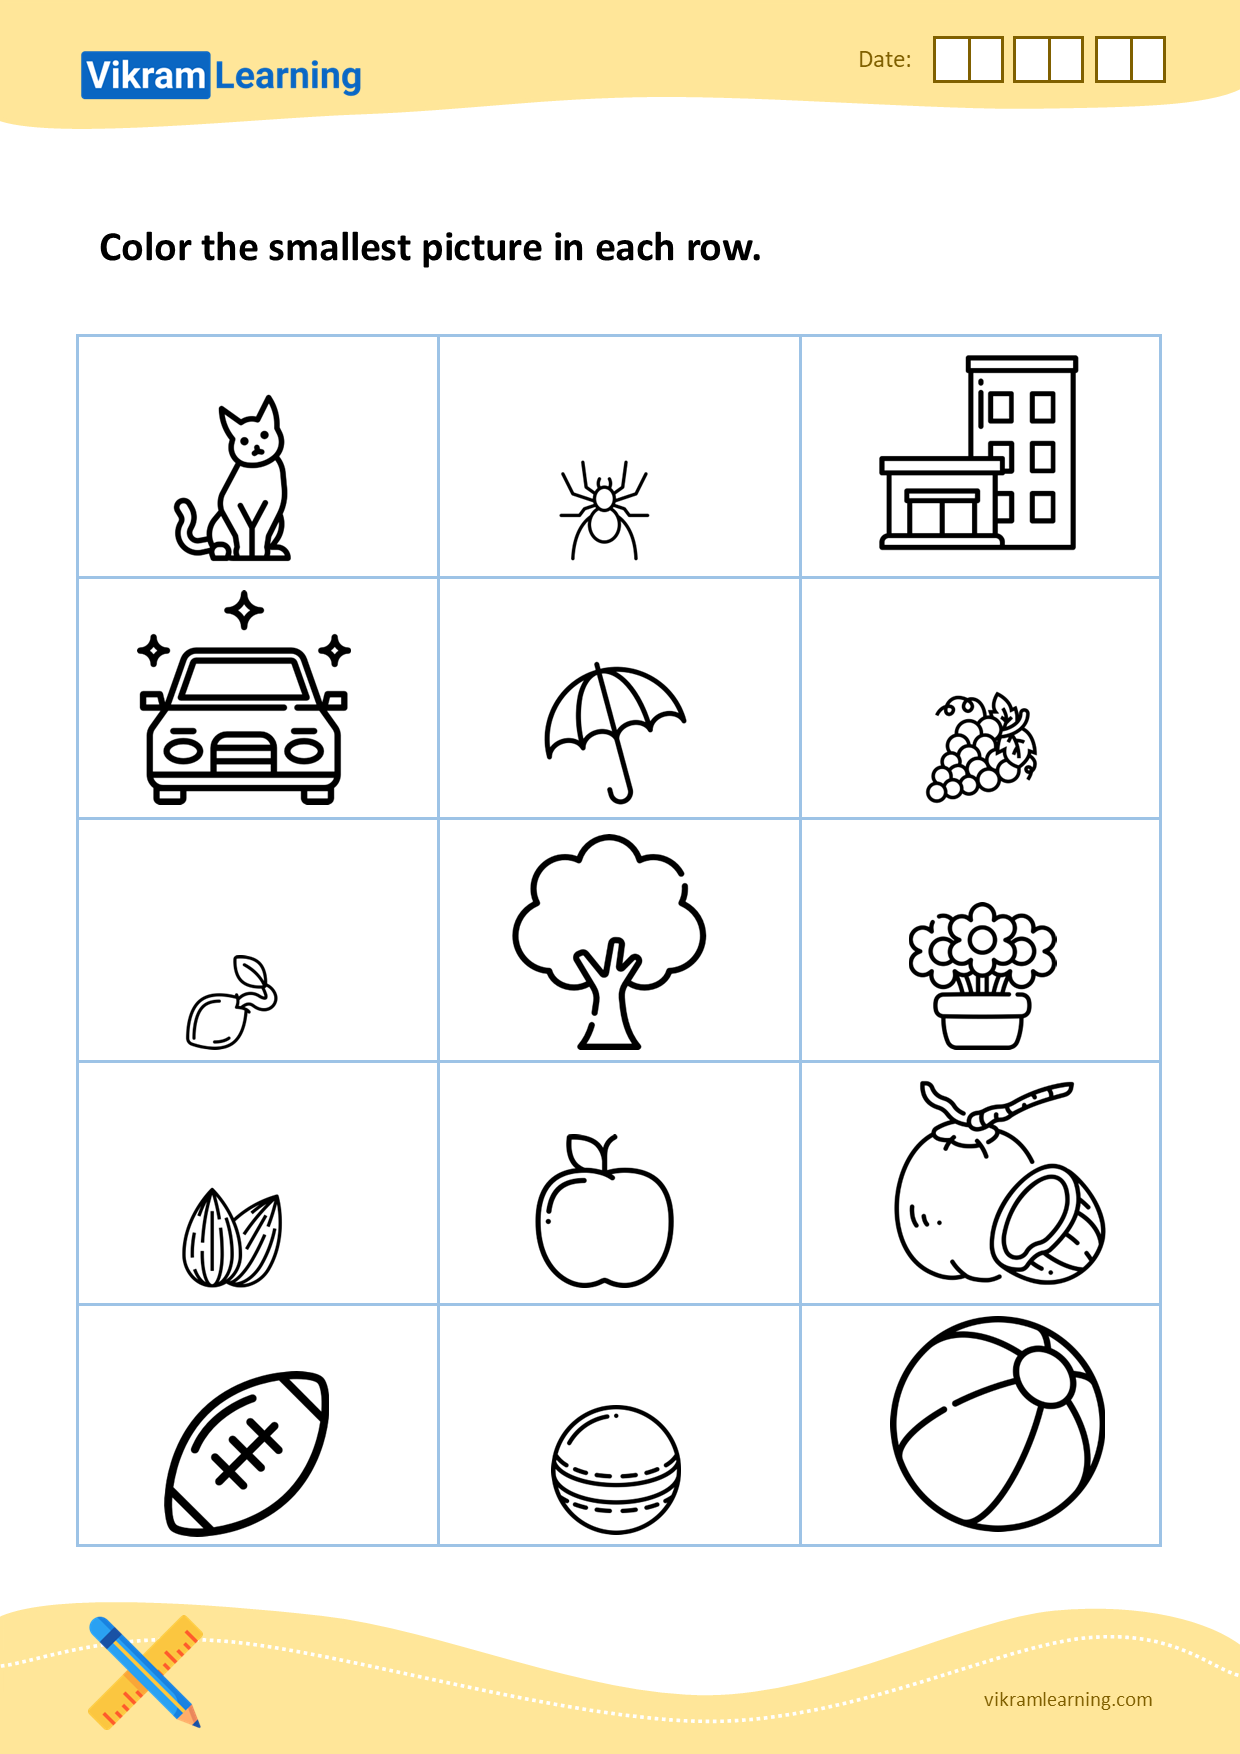 Download color the smallest picture in each row worksheets